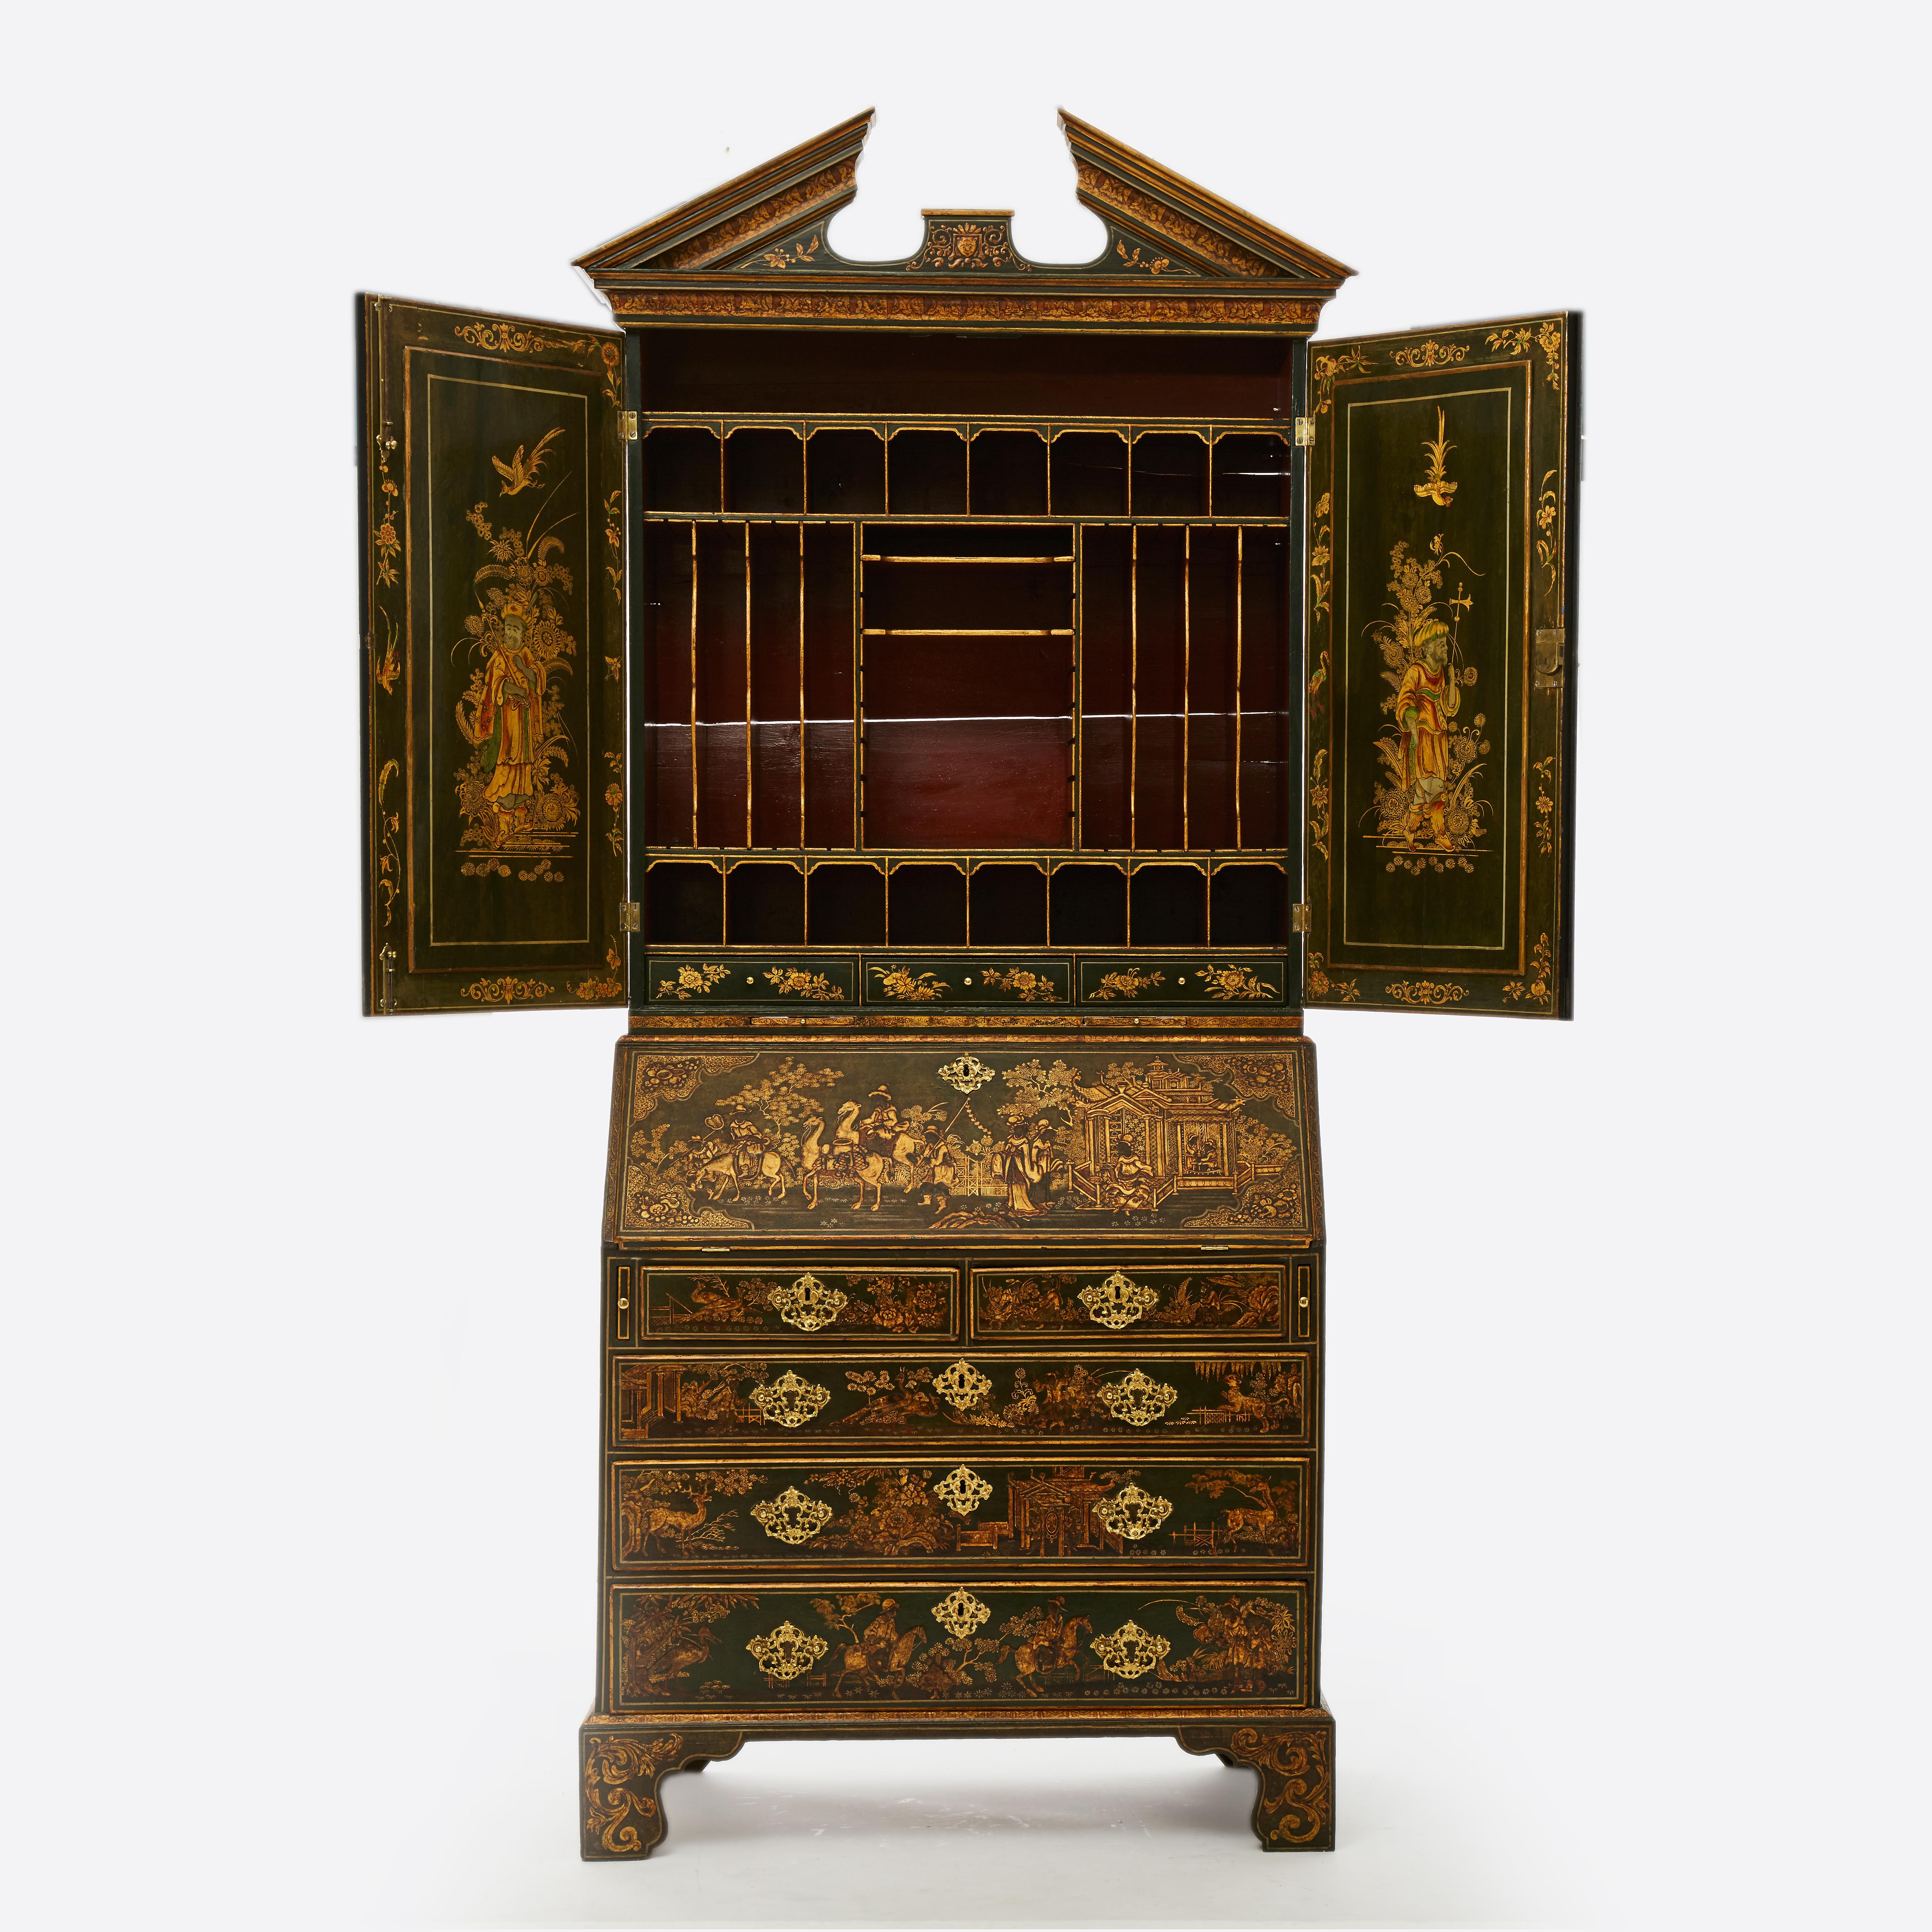 18th century green Japanned Bureau bookcase
George II Period

England circa 1730, attributed to Giles Grendey, the cresting in the form of a broken swan’s neck pediment, the upper section has two doors fitted with shaped mirror plates of